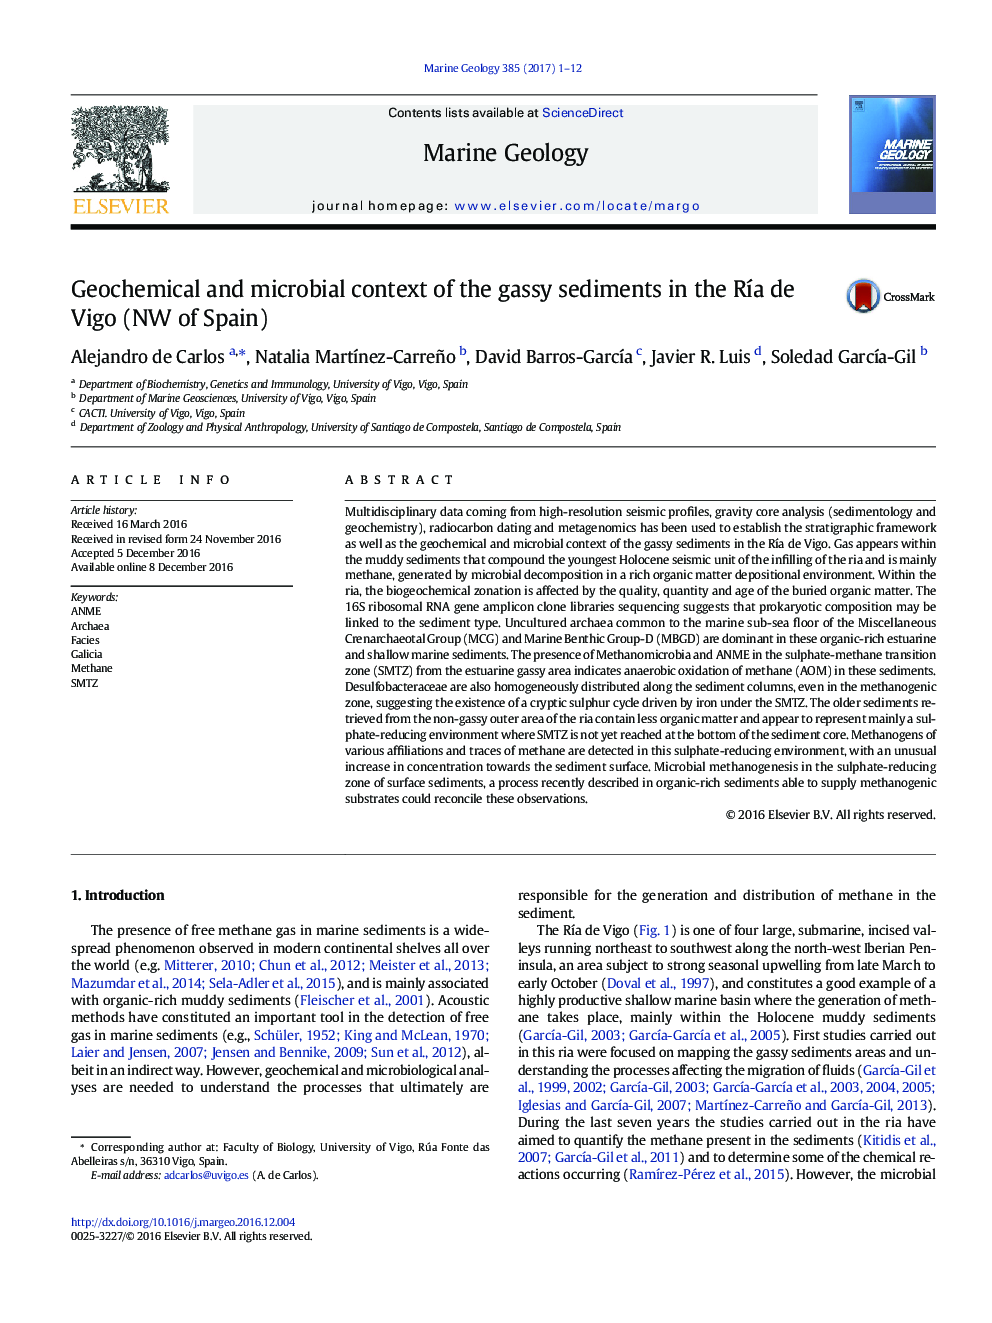 Geochemical and microbial context of the gassy sediments in the RÃ­a de Vigo (NW of Spain)